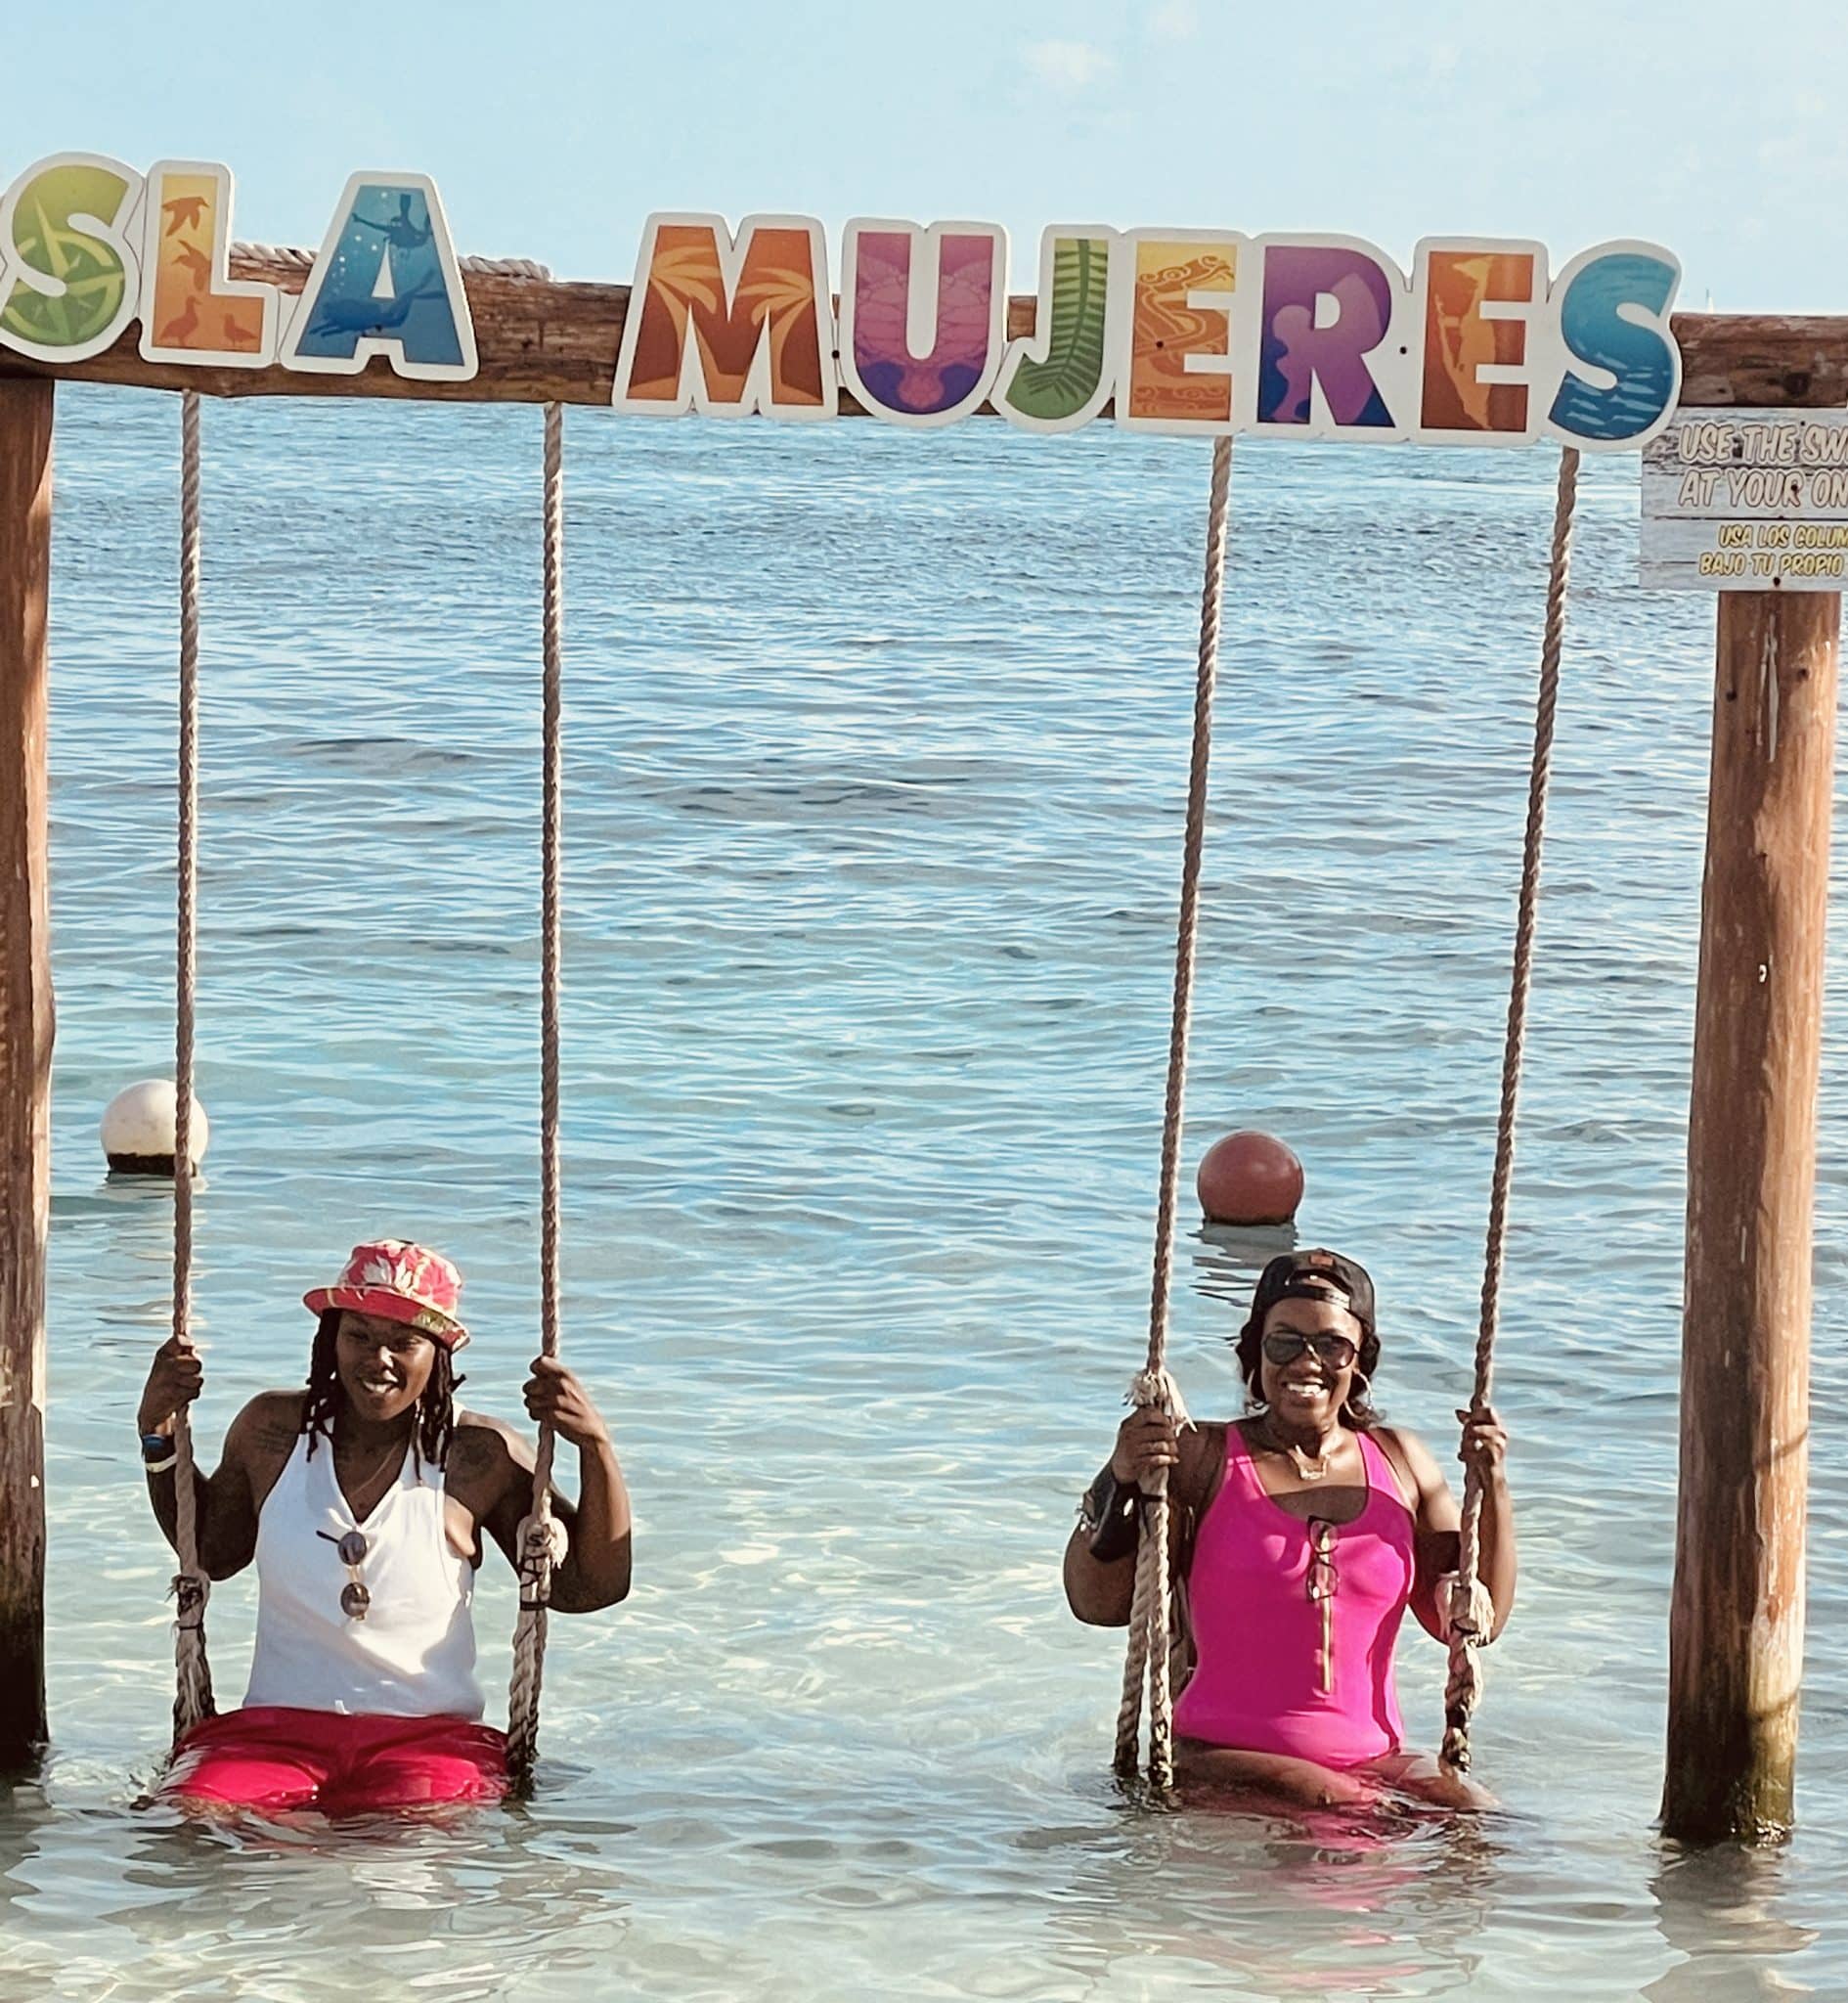 two women sit on swings in the ocean water with letters above reading isla mujeres